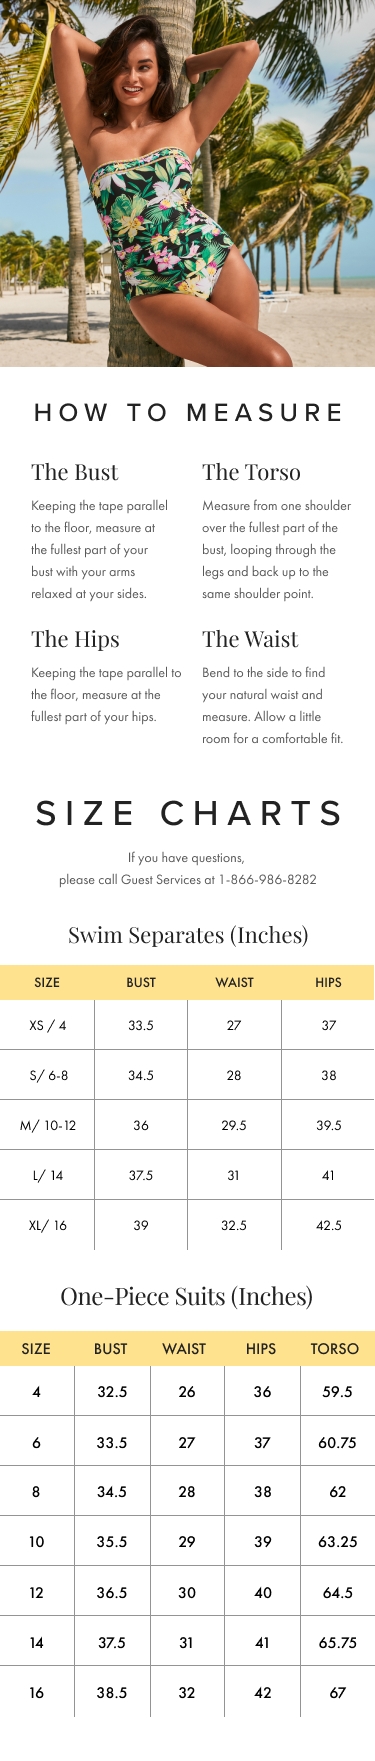 How To Measure & Size Charts